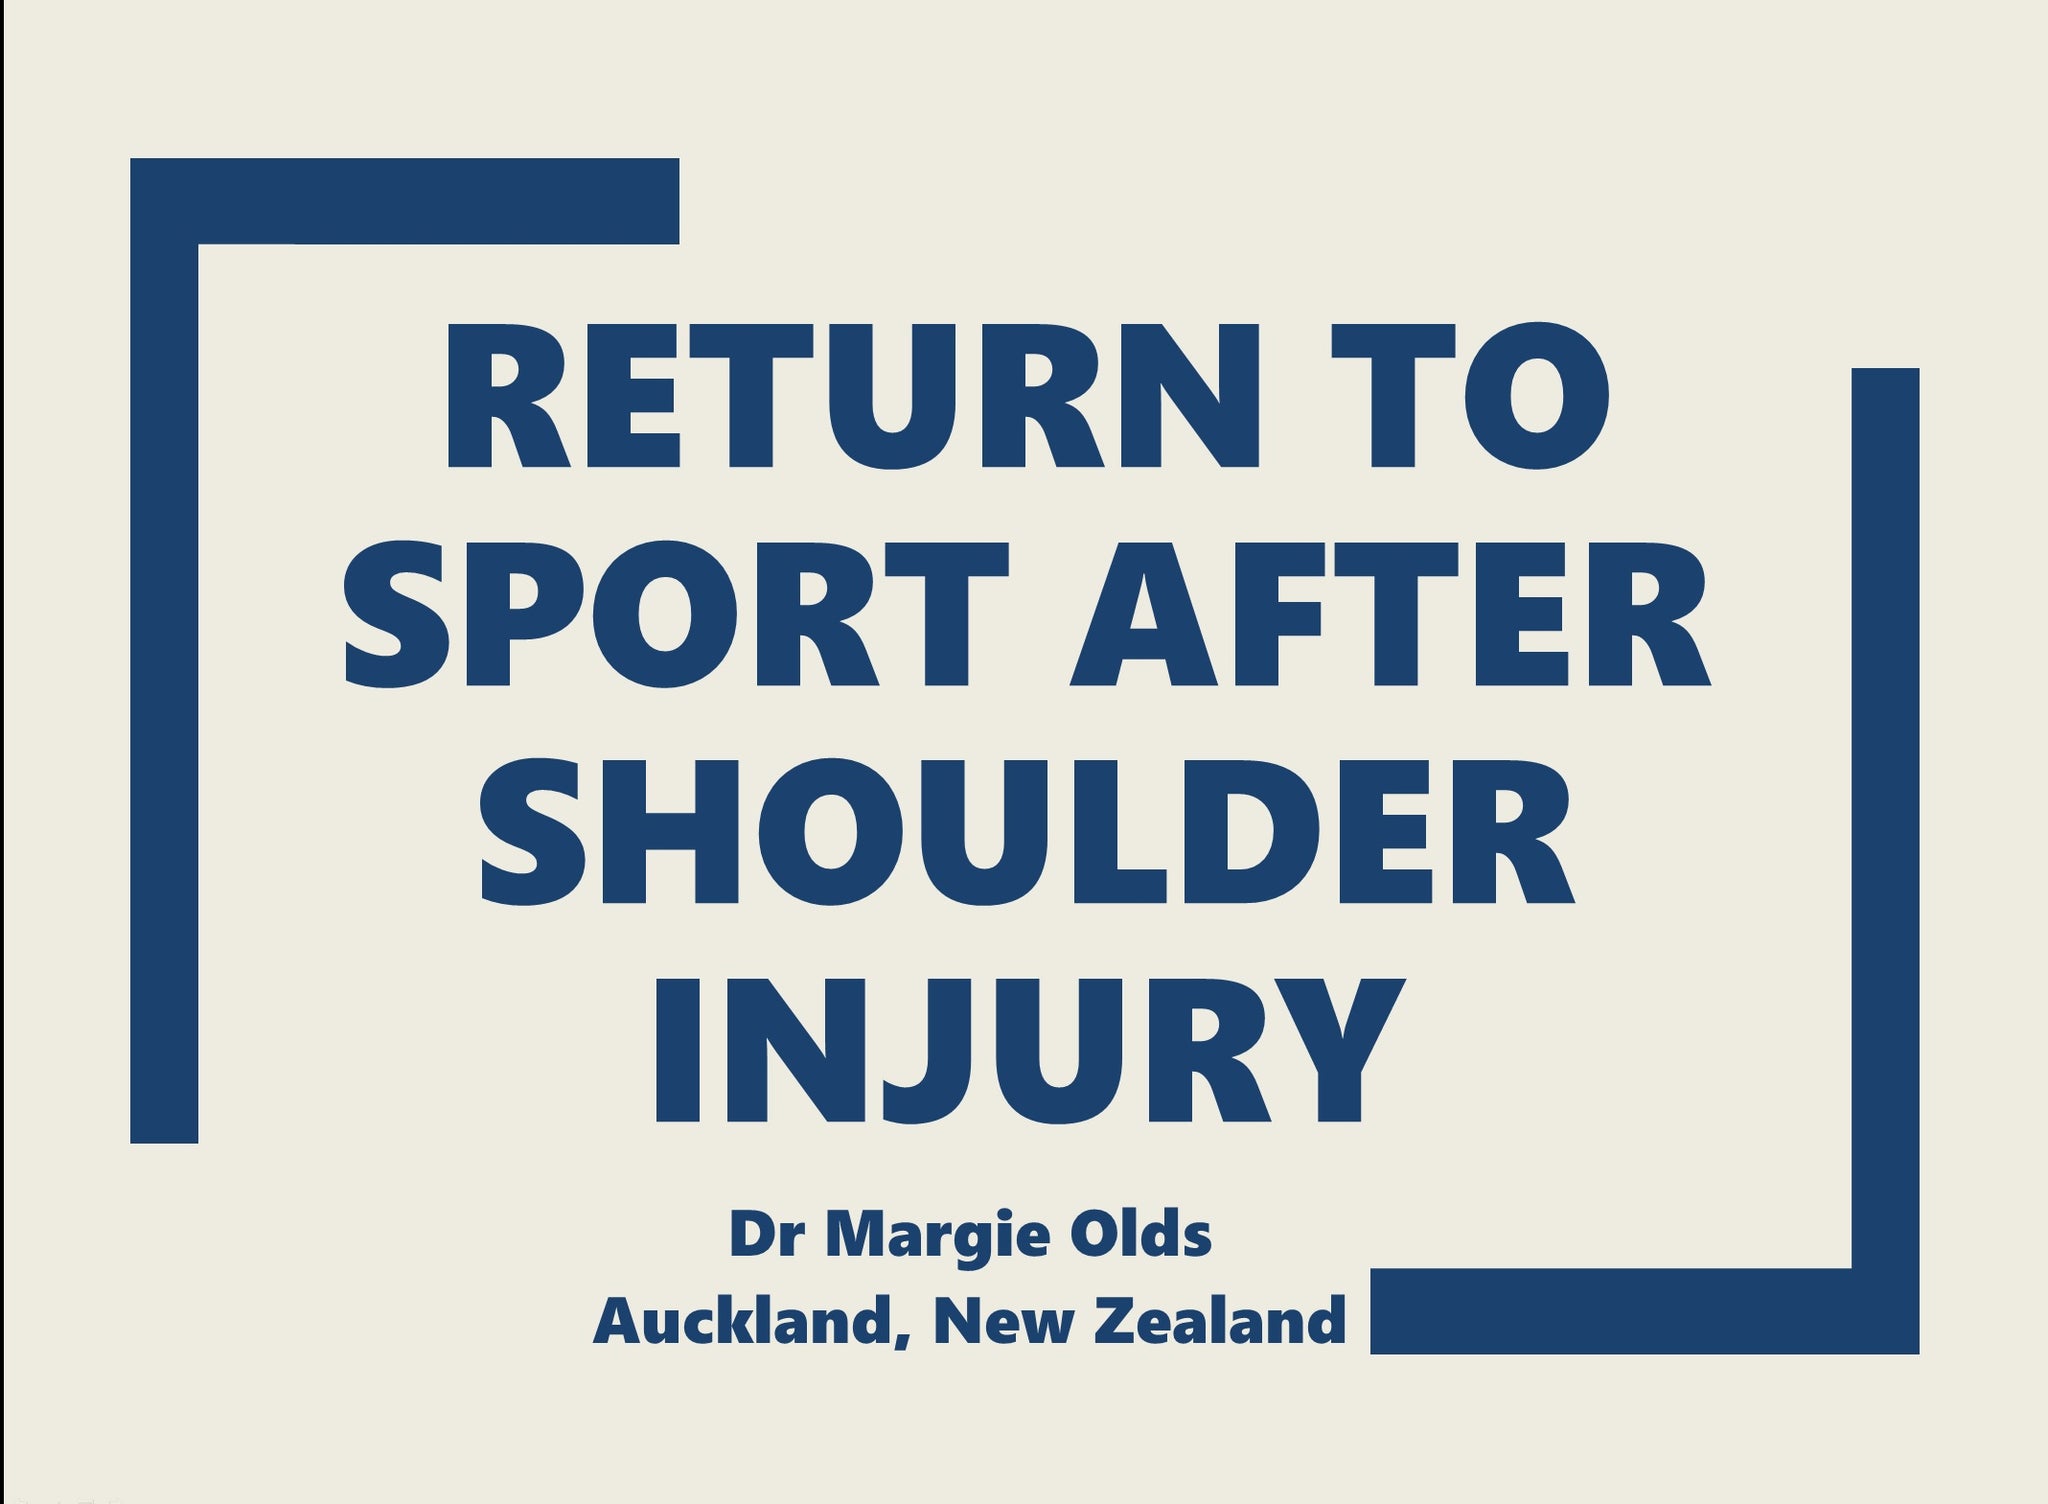 Return to Sport after Shoulder Injury: An Introduction